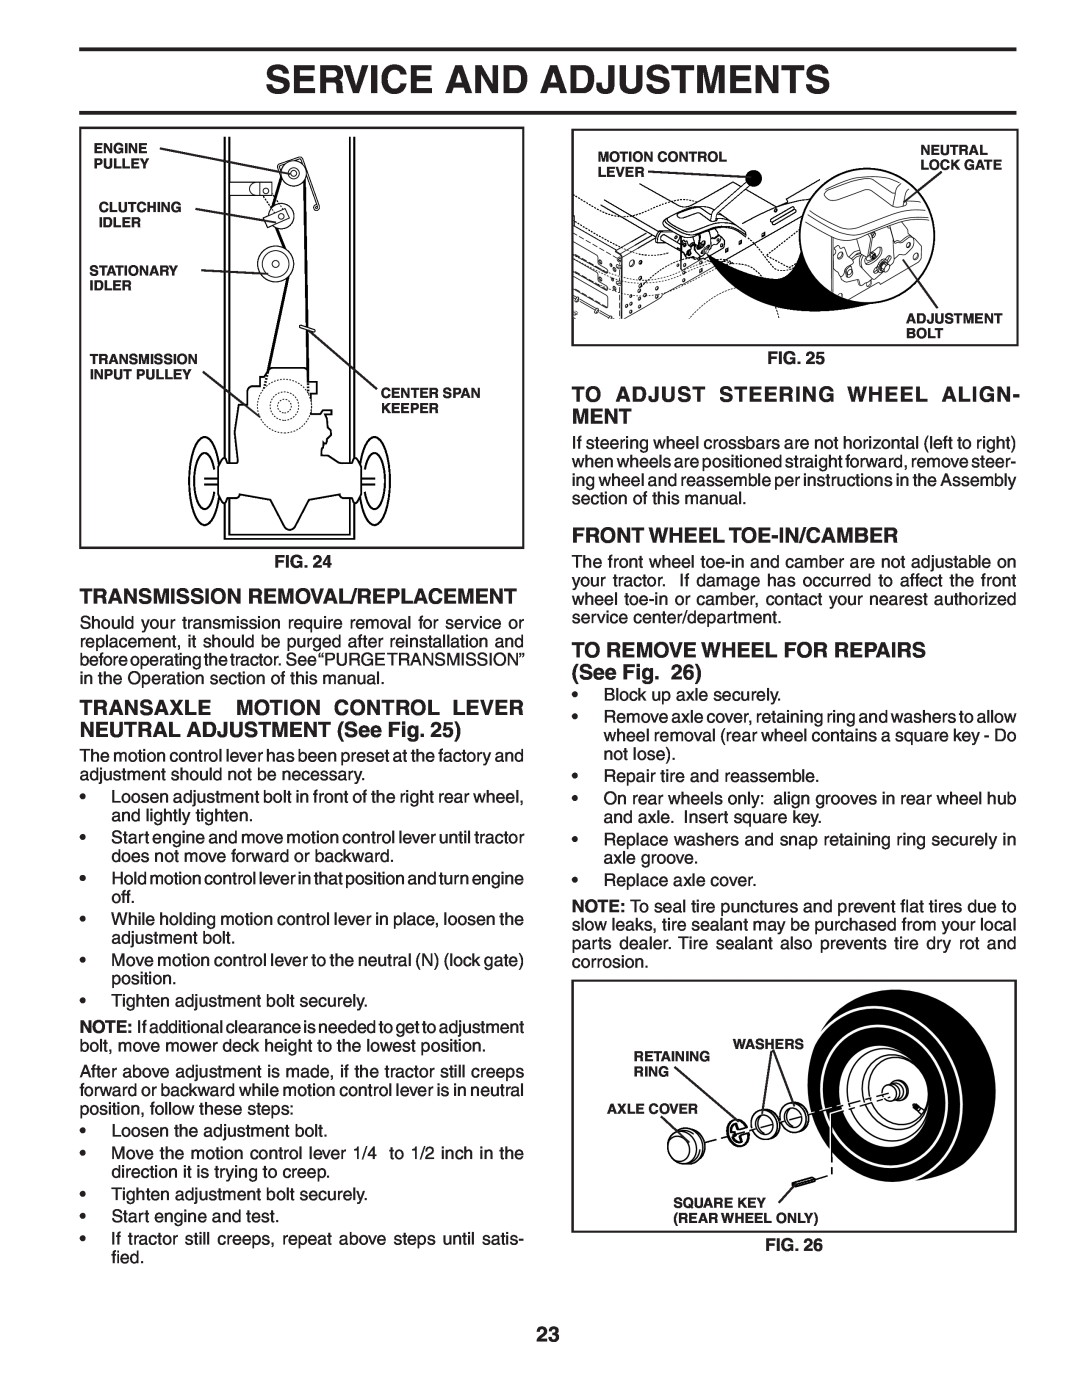 Poulan PD22H42STA owner manual Transmission Removal/Replacement, TRANSAXLE MOTION CONTROL LEVER NEUTRAL ADJUSTMENT See Fig 